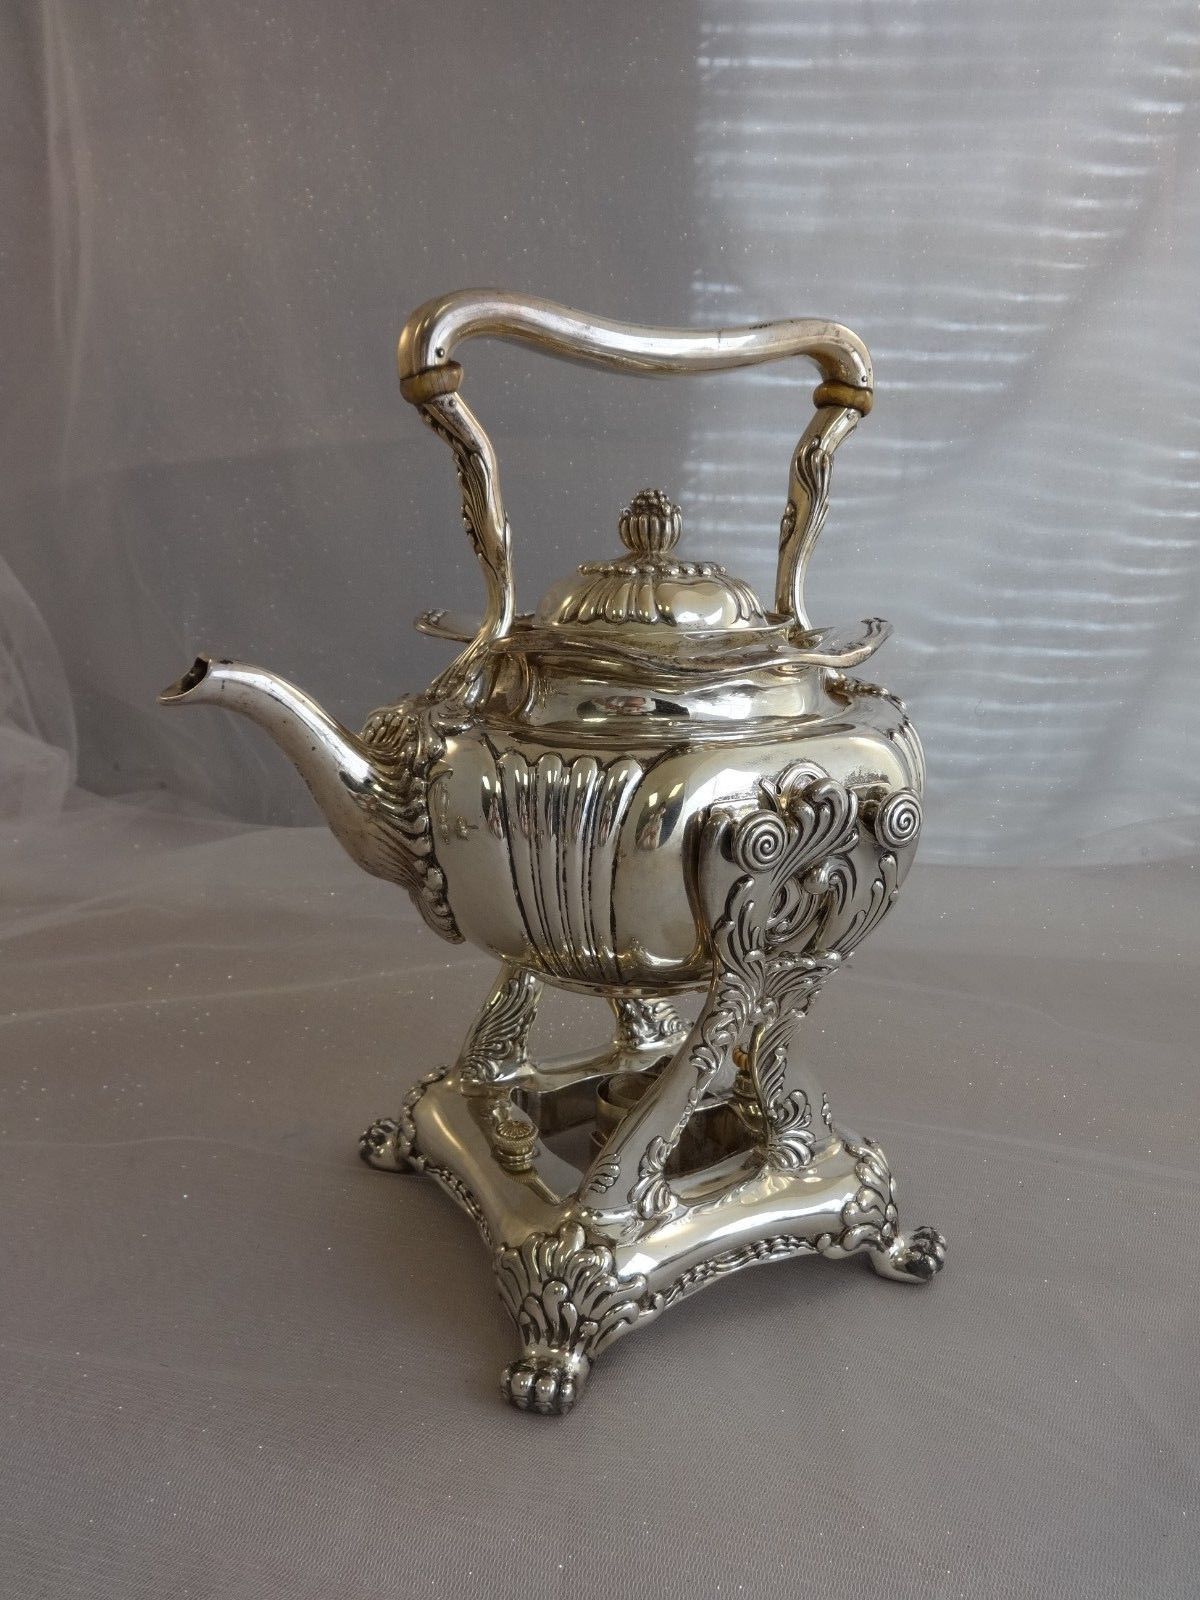 This is an exquisite, exceptional, Tiffany & Co. special order/custom one-of-a-kind sterling six-piece sterling set with kettle on stand and chrysanthemum motif. The pieces have an inscription that says 